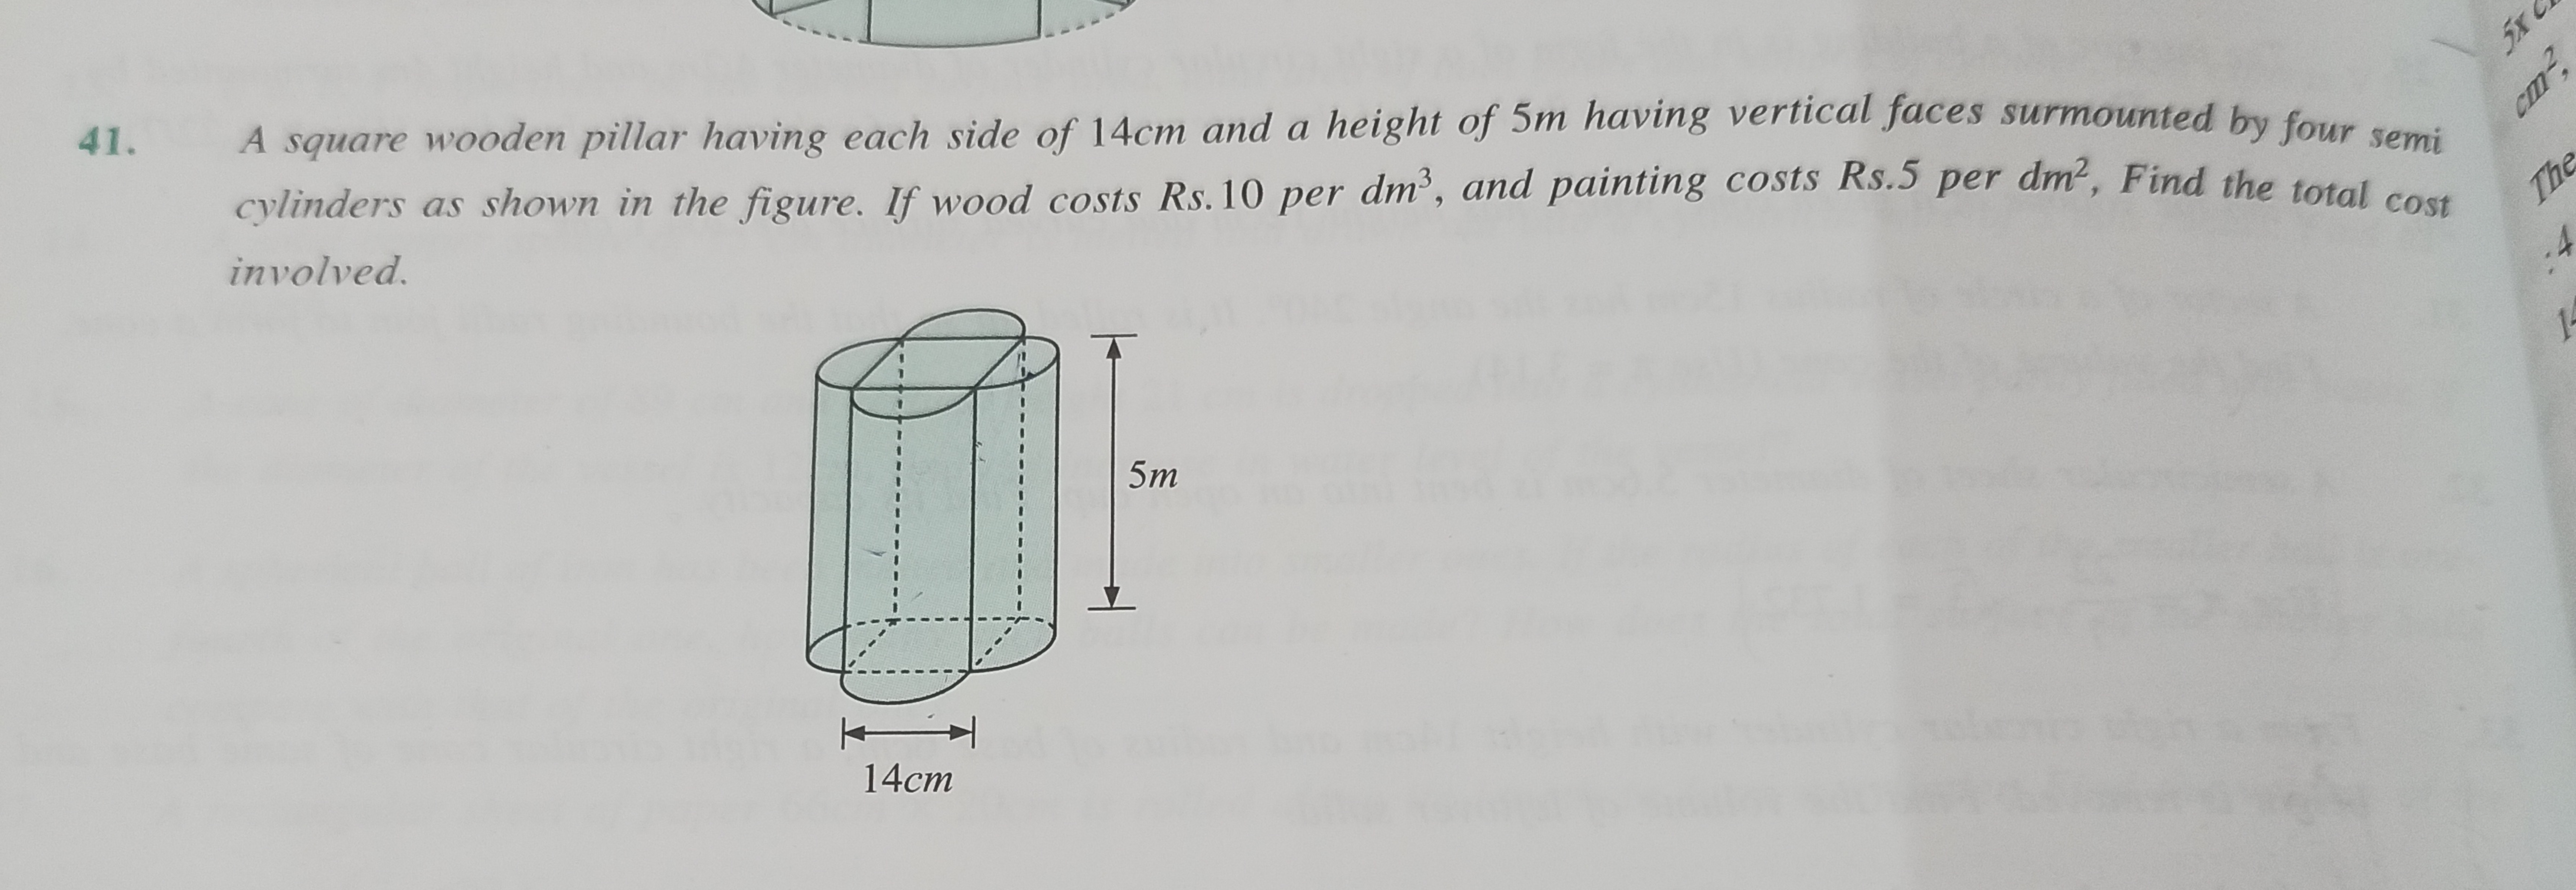 41. A square wooden pillar having each side of 14 cm and a height of 5